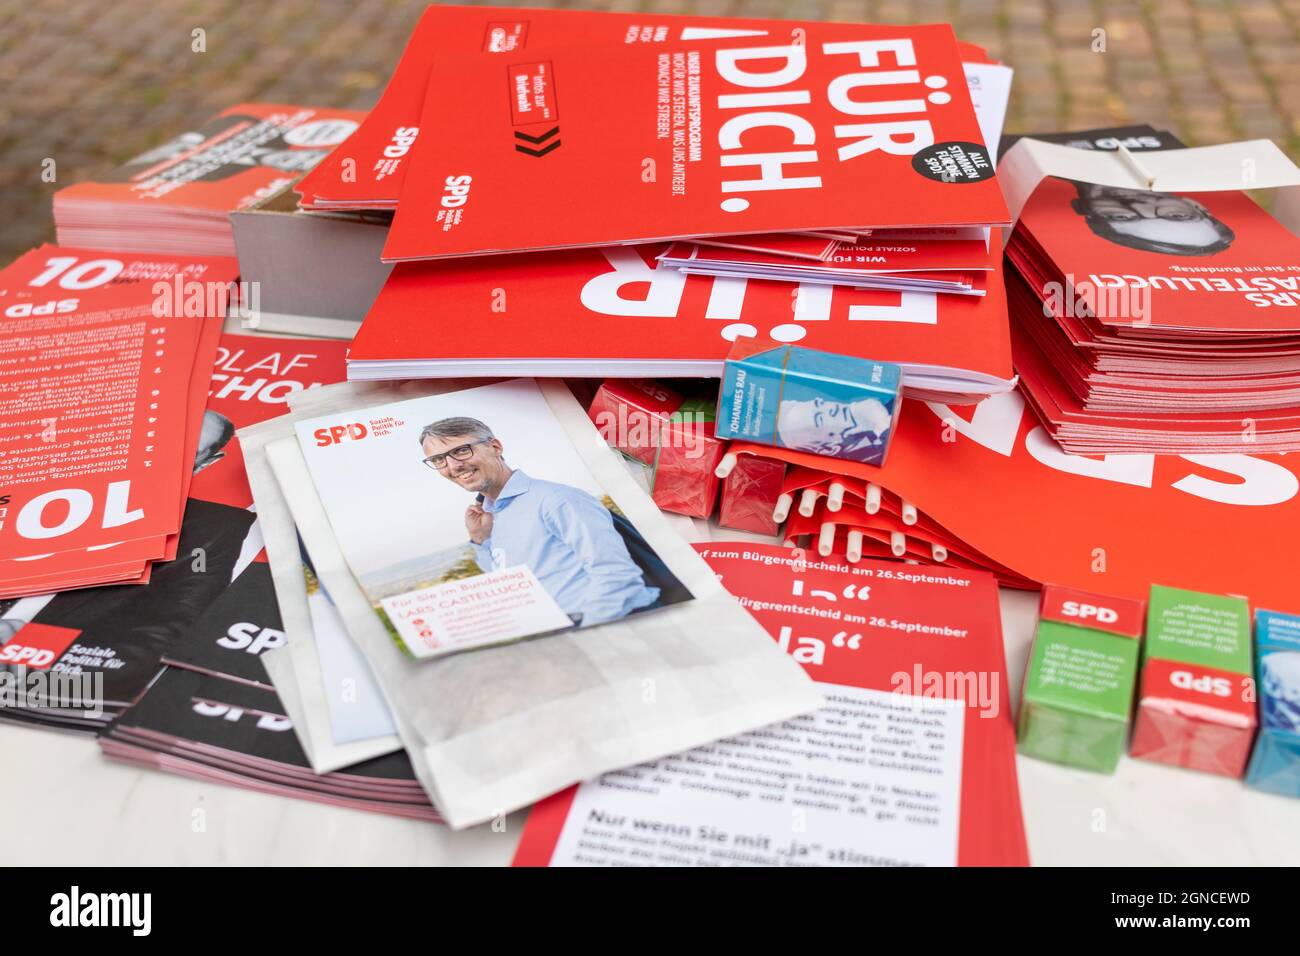 Neckargemuend, Germany - September 11, 2021: campaign materials of the Social Democratic Party of Germany, SPD, at an election information stand for t Stock Photo